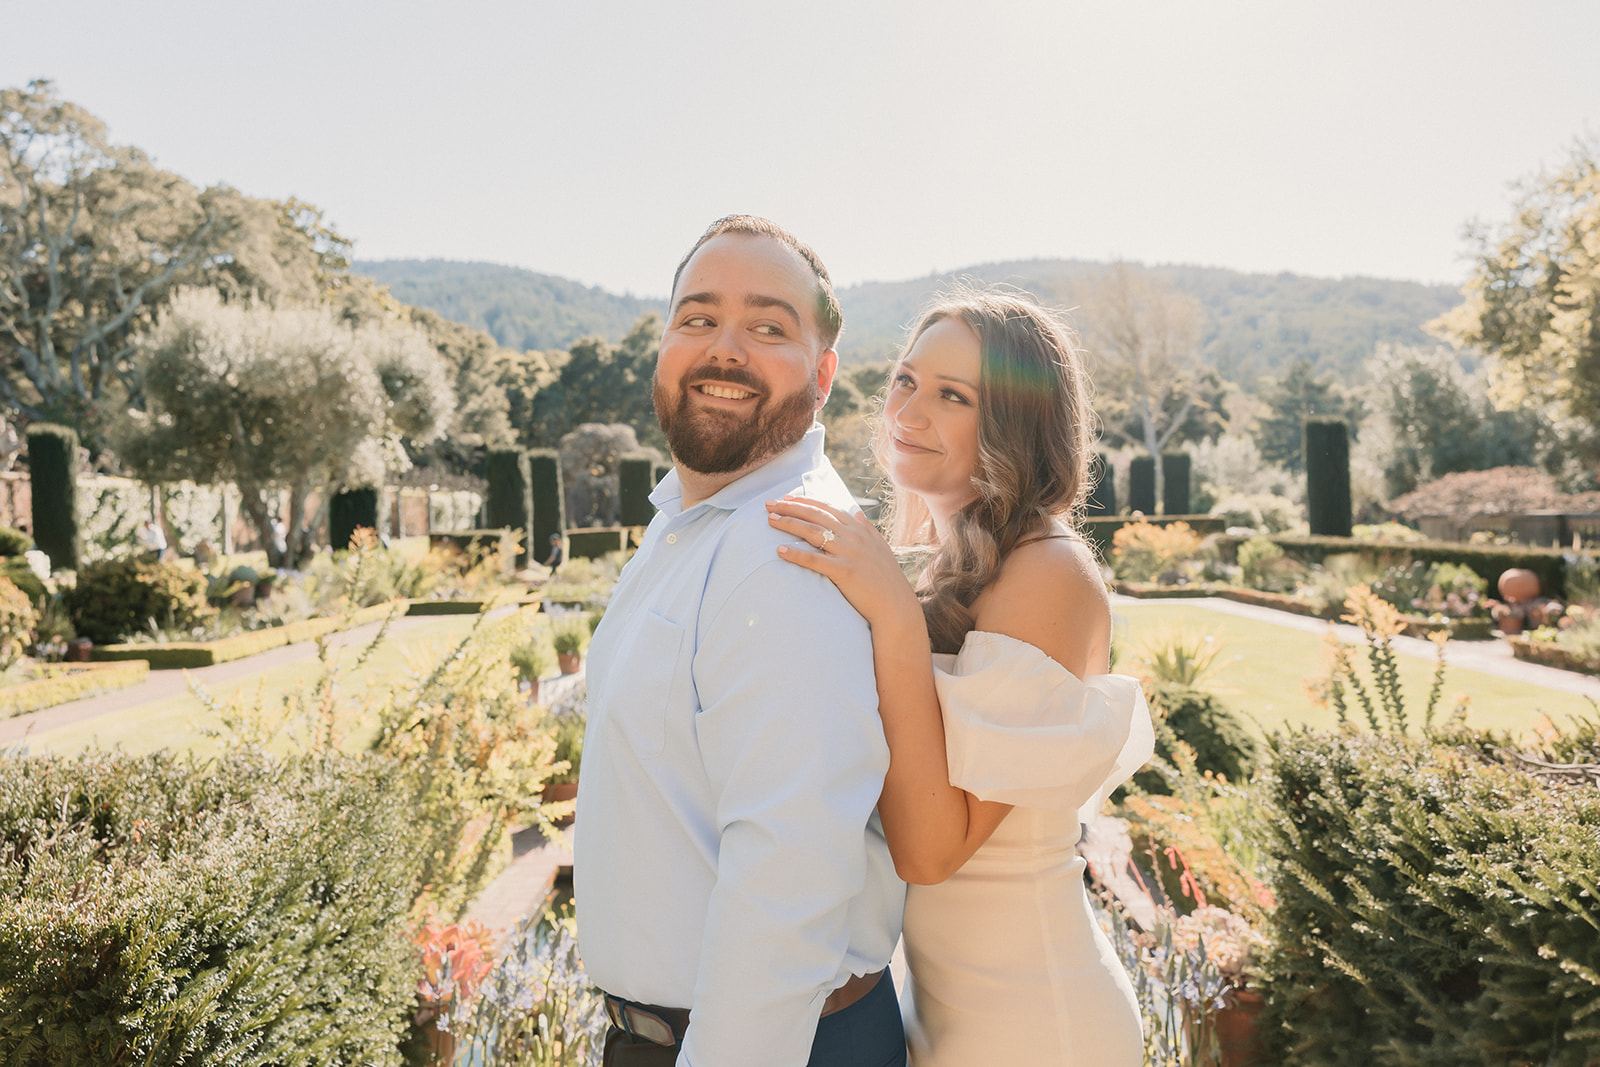 A man in a blue shirt kisses a woman in a white dress on the cheek while standing in a sunlit garden for their engagement photos at the filoli gardens